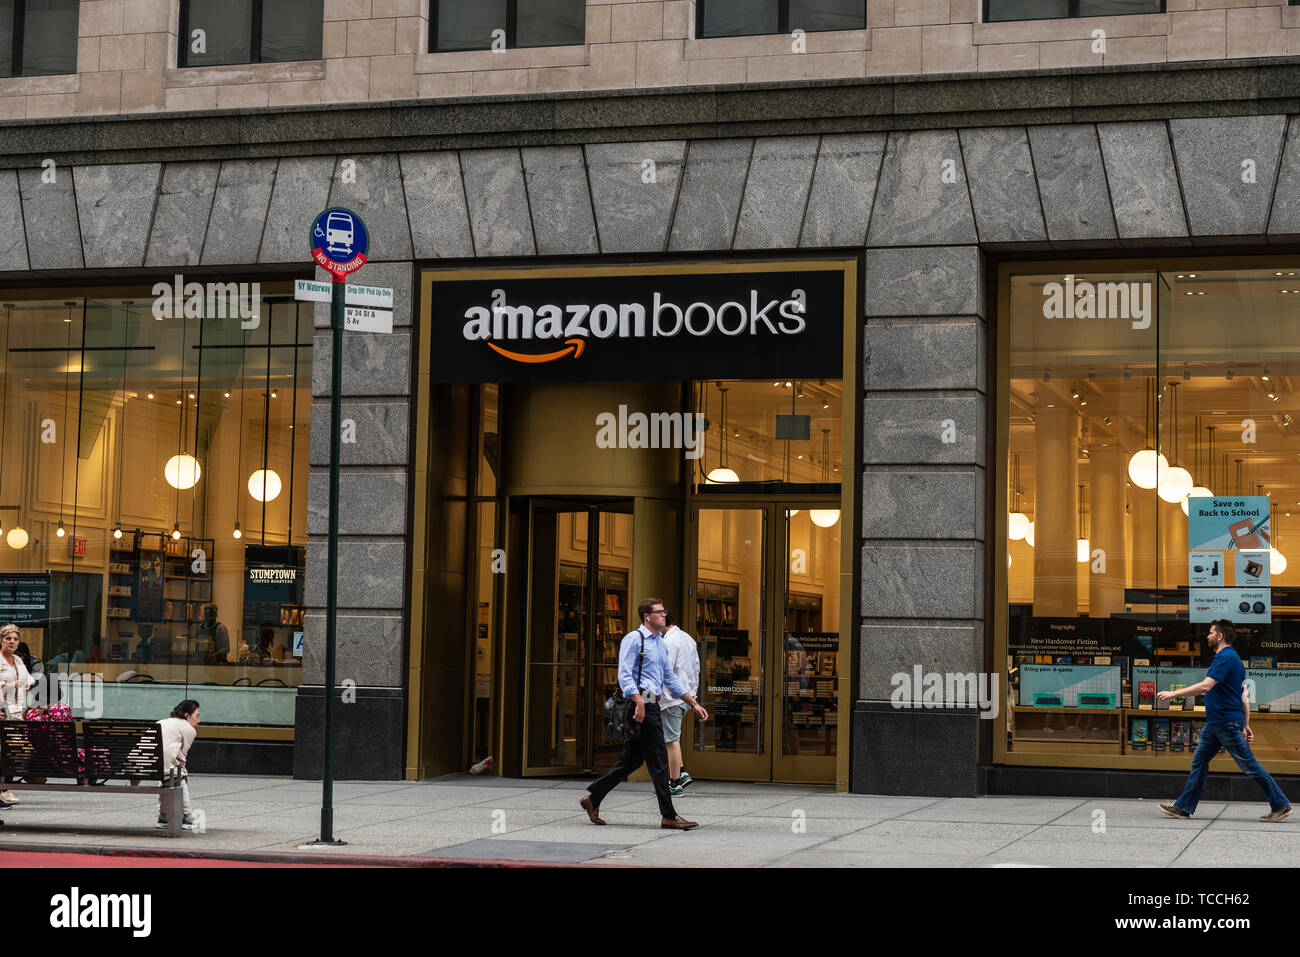 New York City, USA - July 31, 2018: Amazon Books, famous bookstore store, with people around in Manhattan, New York City, USA Stock Photo